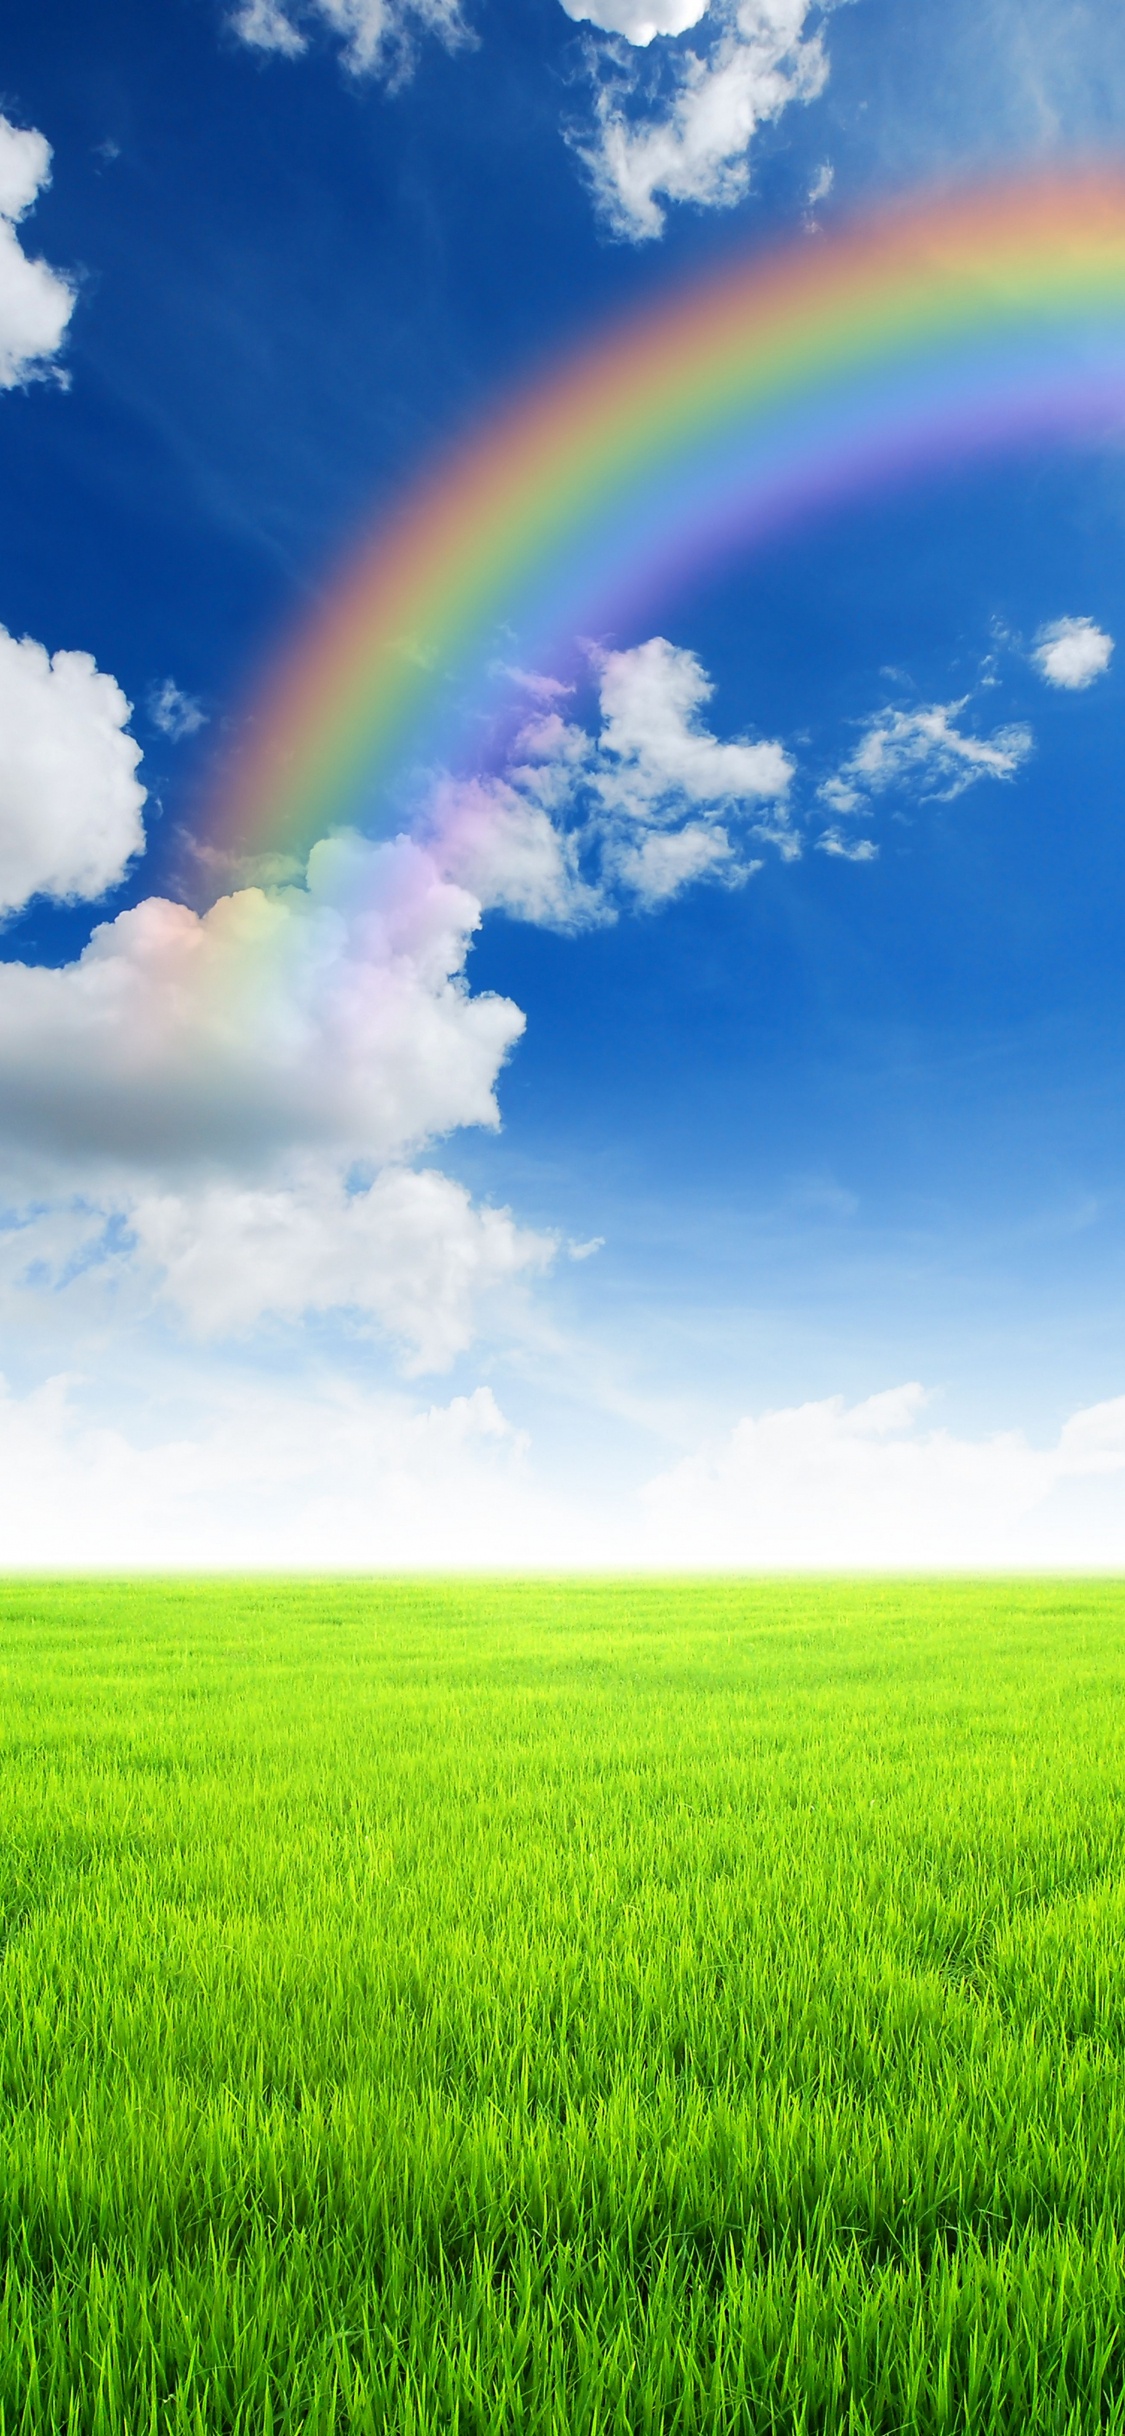 Green Grass Field Under Blue Sky and White Clouds During Daytime. Wallpaper in 1125x2436 Resolution